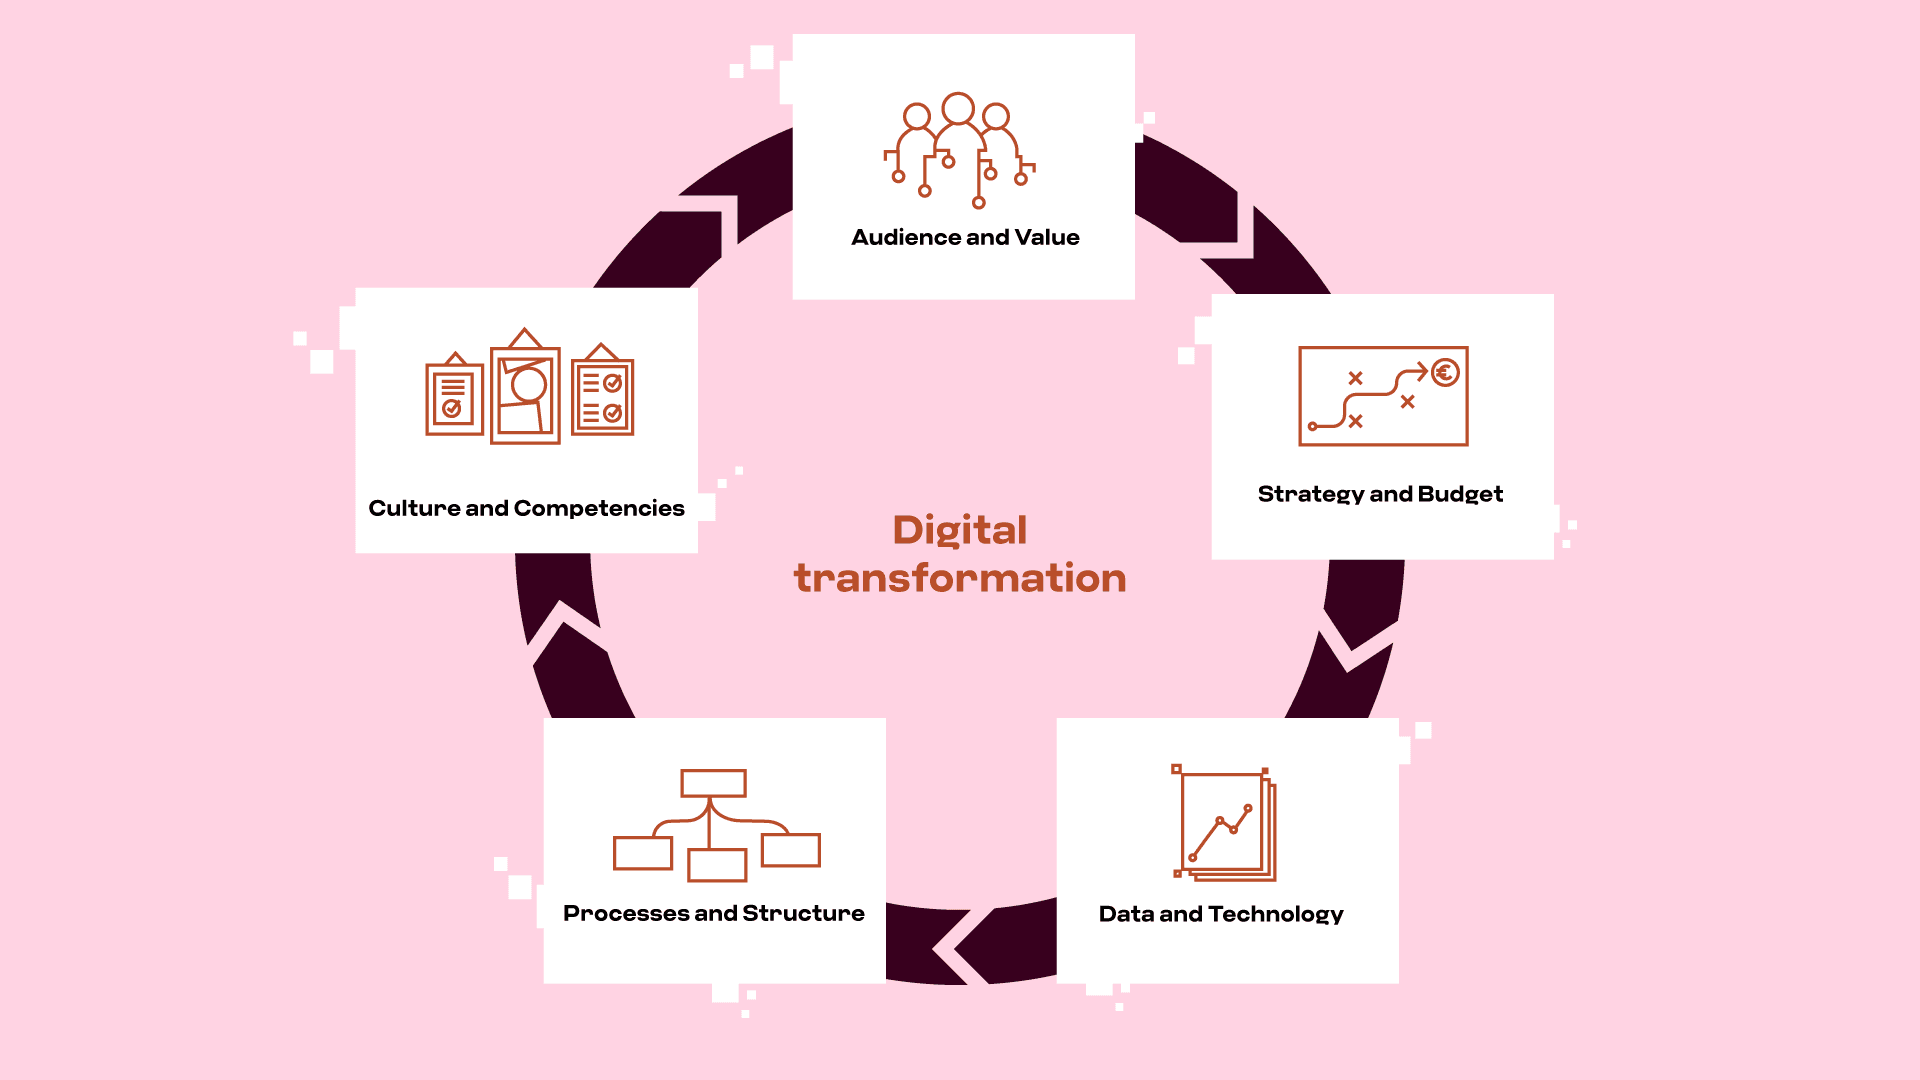 Infographic with the five components of digital transformation connected in an ongoing cycle: audience & value, strategy & budget, data & technology, processes & structure, and culture & competencies